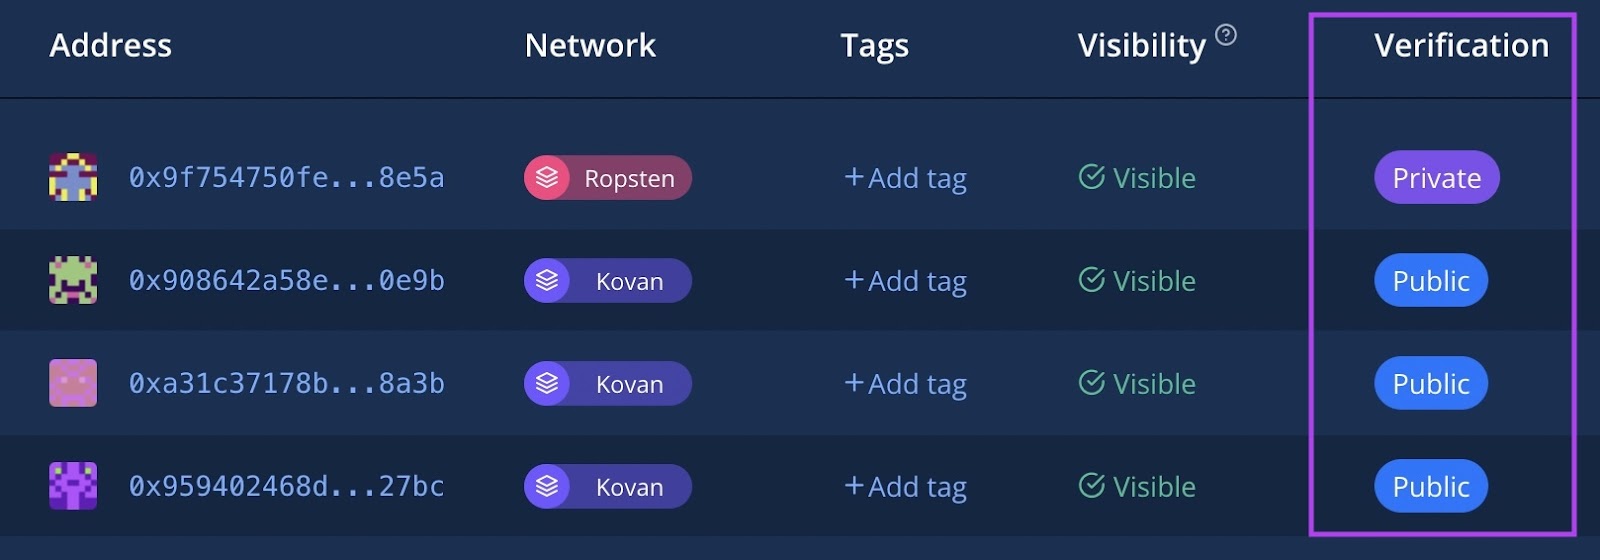 Is There A Way To Display Values When Running Smart Contracts On Kovan?